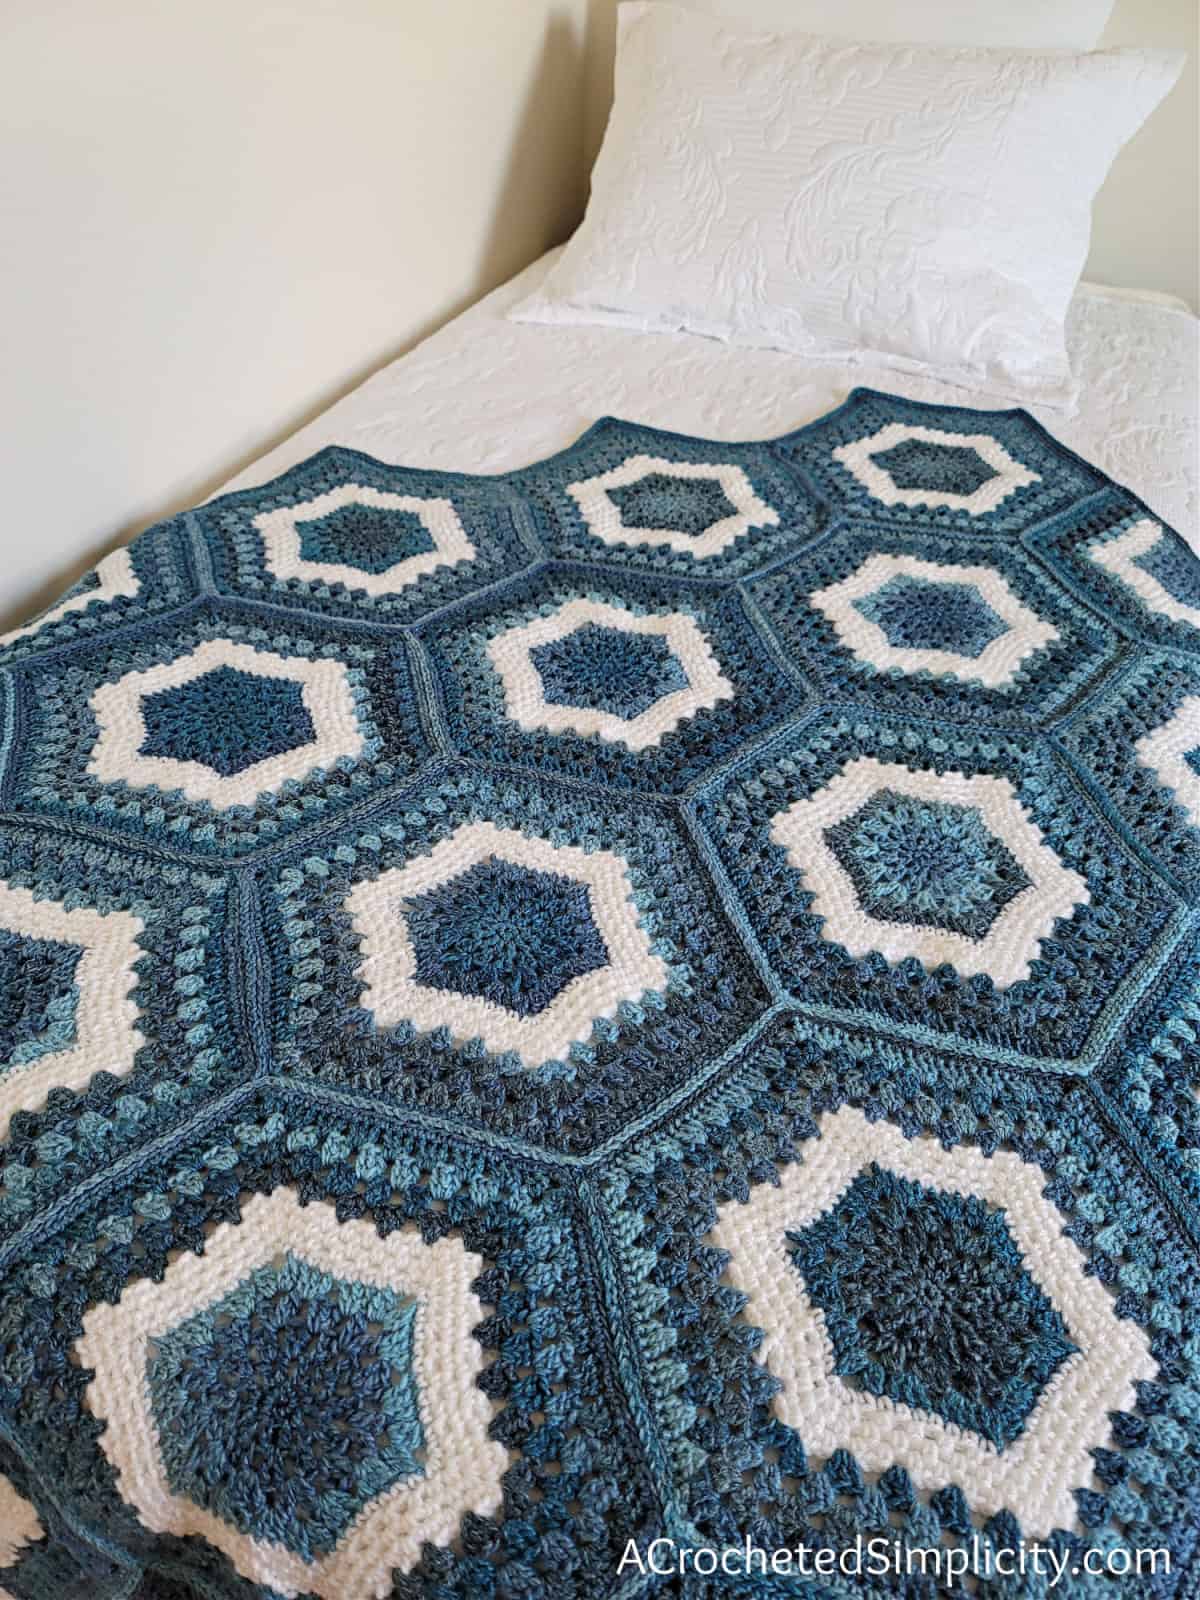 Hexagon crochet blanket in shades of blue and white yarn laying on white quilt.